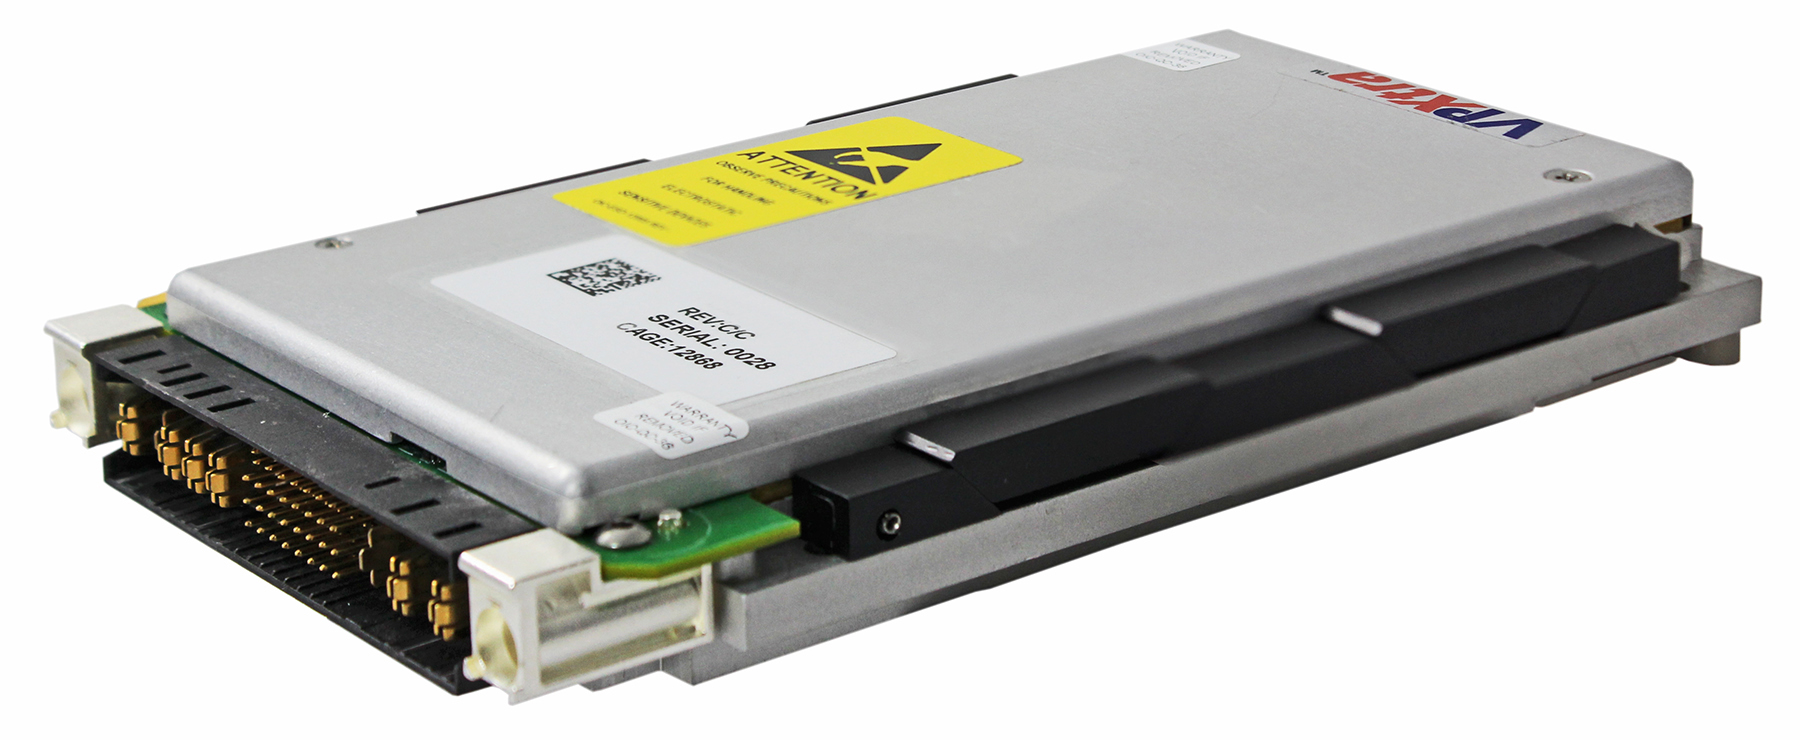 Behlman VPXtra™ HU700HV Hold-Up Card works in conjunction with Behlman VPXtra™ 800A, to store up to 650W of DC power for 50msec, to meet input power transient specifications of MIL-STD-704 (A to F).